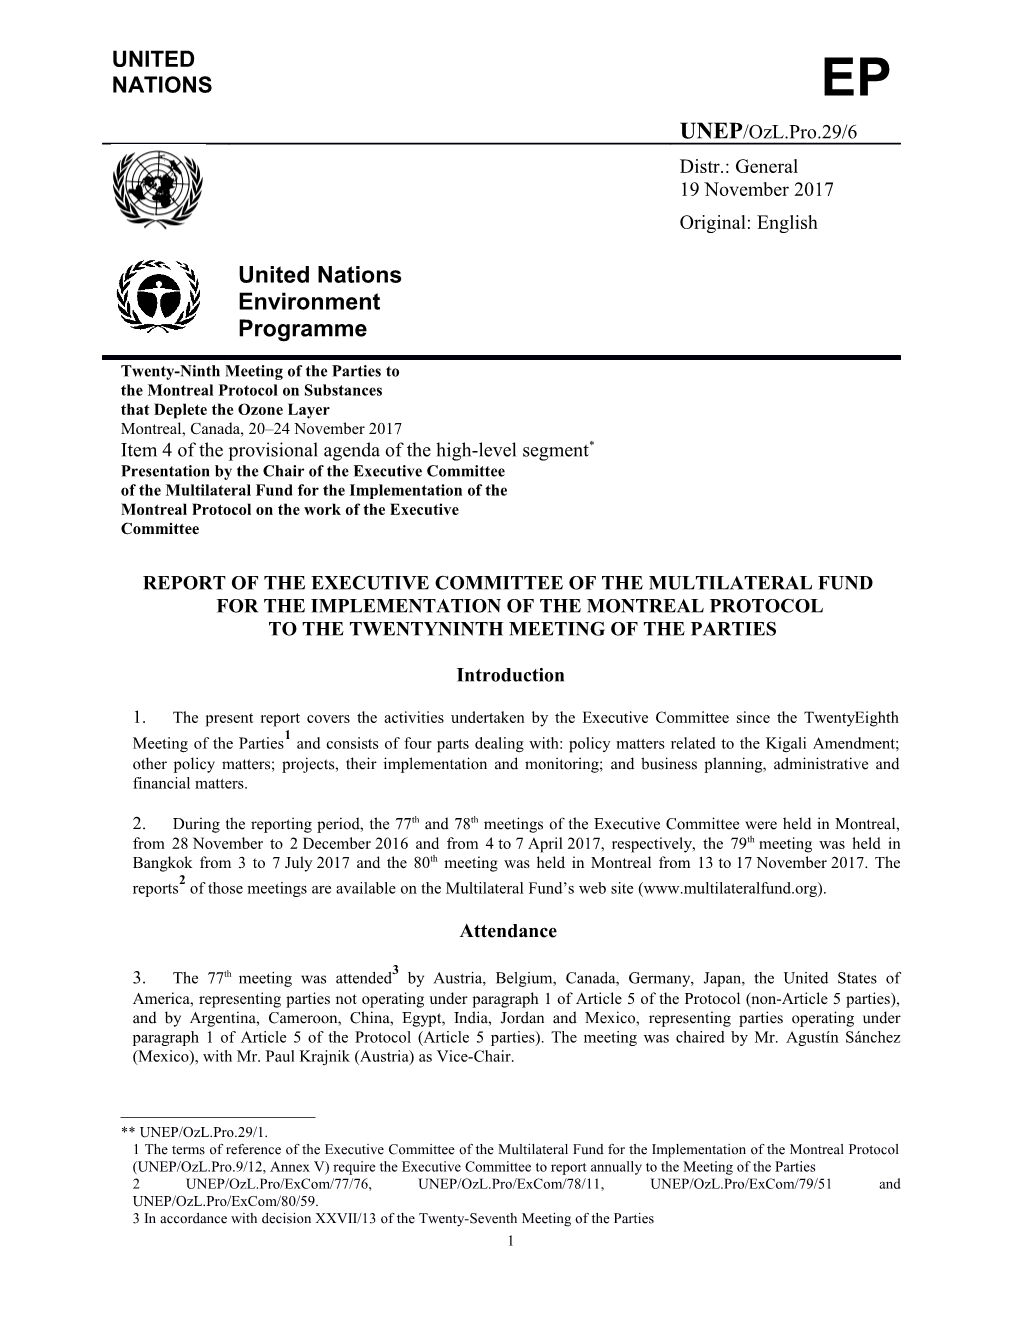 Report of the Executive Committee of the Multilateral Fund for the Implementation of The s1